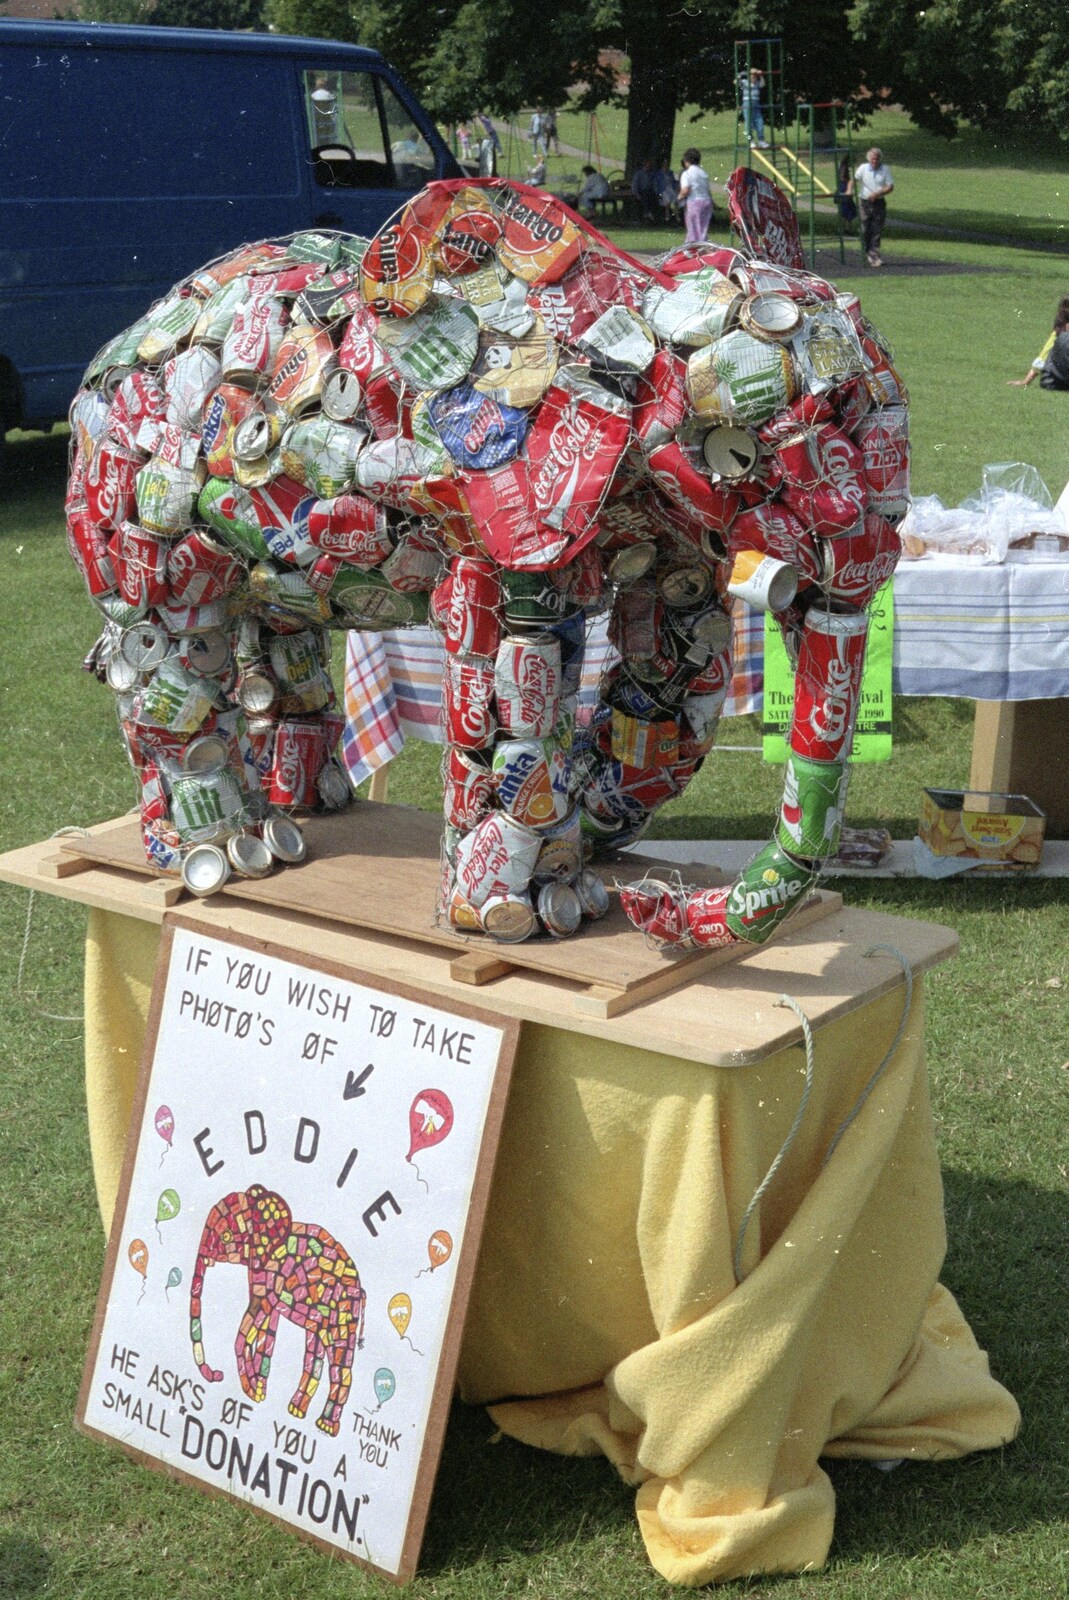 Eddie the elephant, made entirely out of cans from A Raft Race on the Mere, Diss, Norfolk - 2nd June 1990